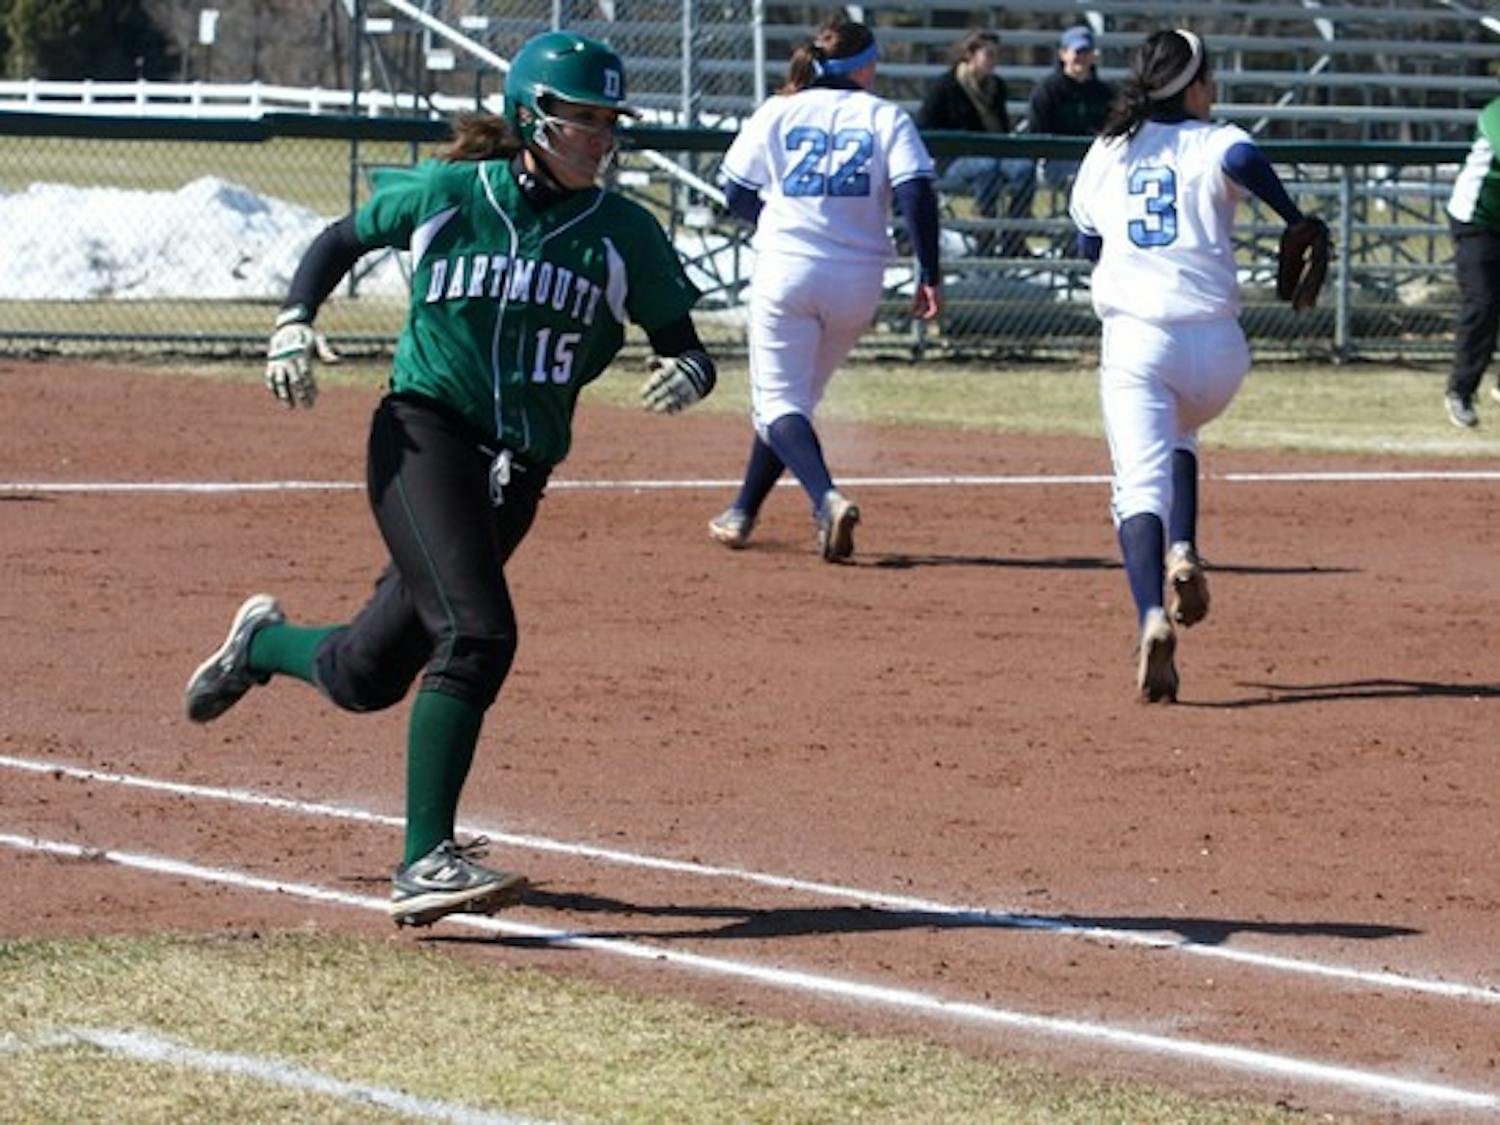 The Dartmouth softball team routed Columbia in consecutive games during Monday's doubleheader.